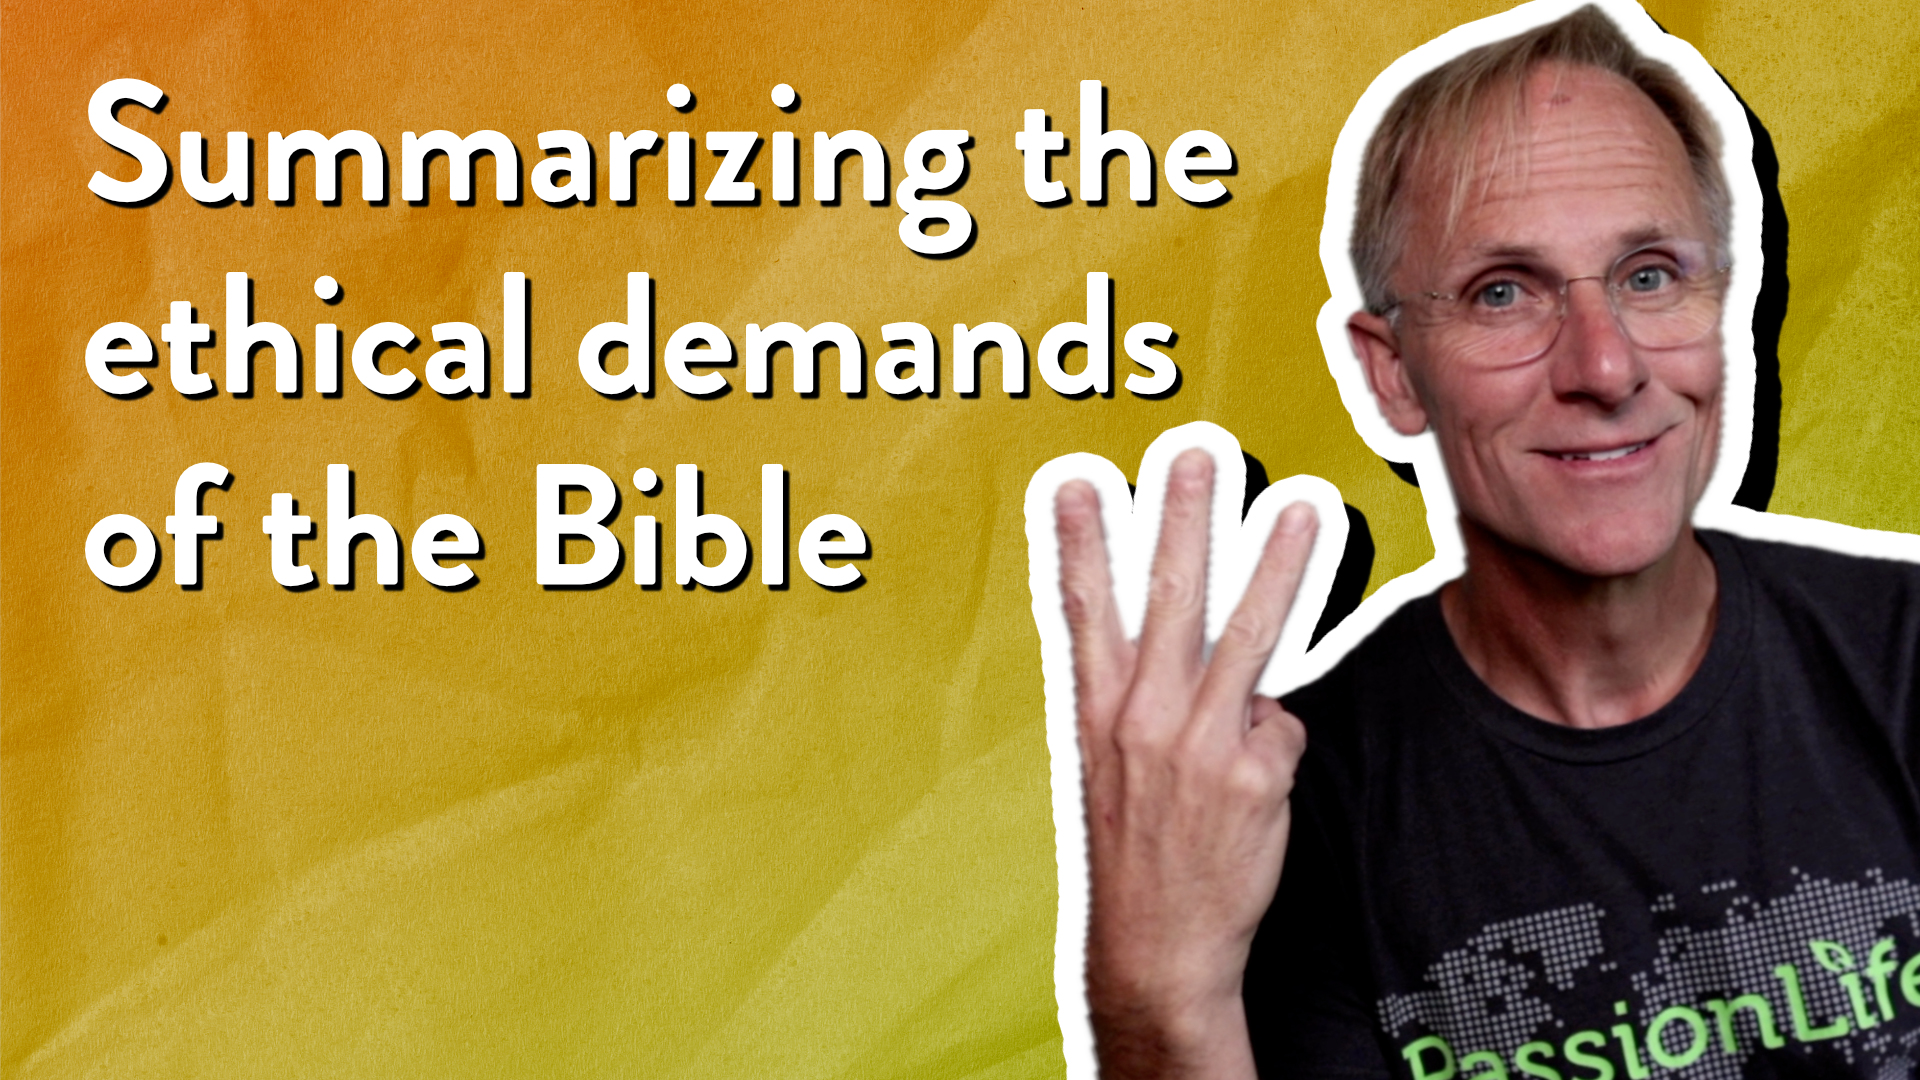 Summarizing the ethical demands of the Bible